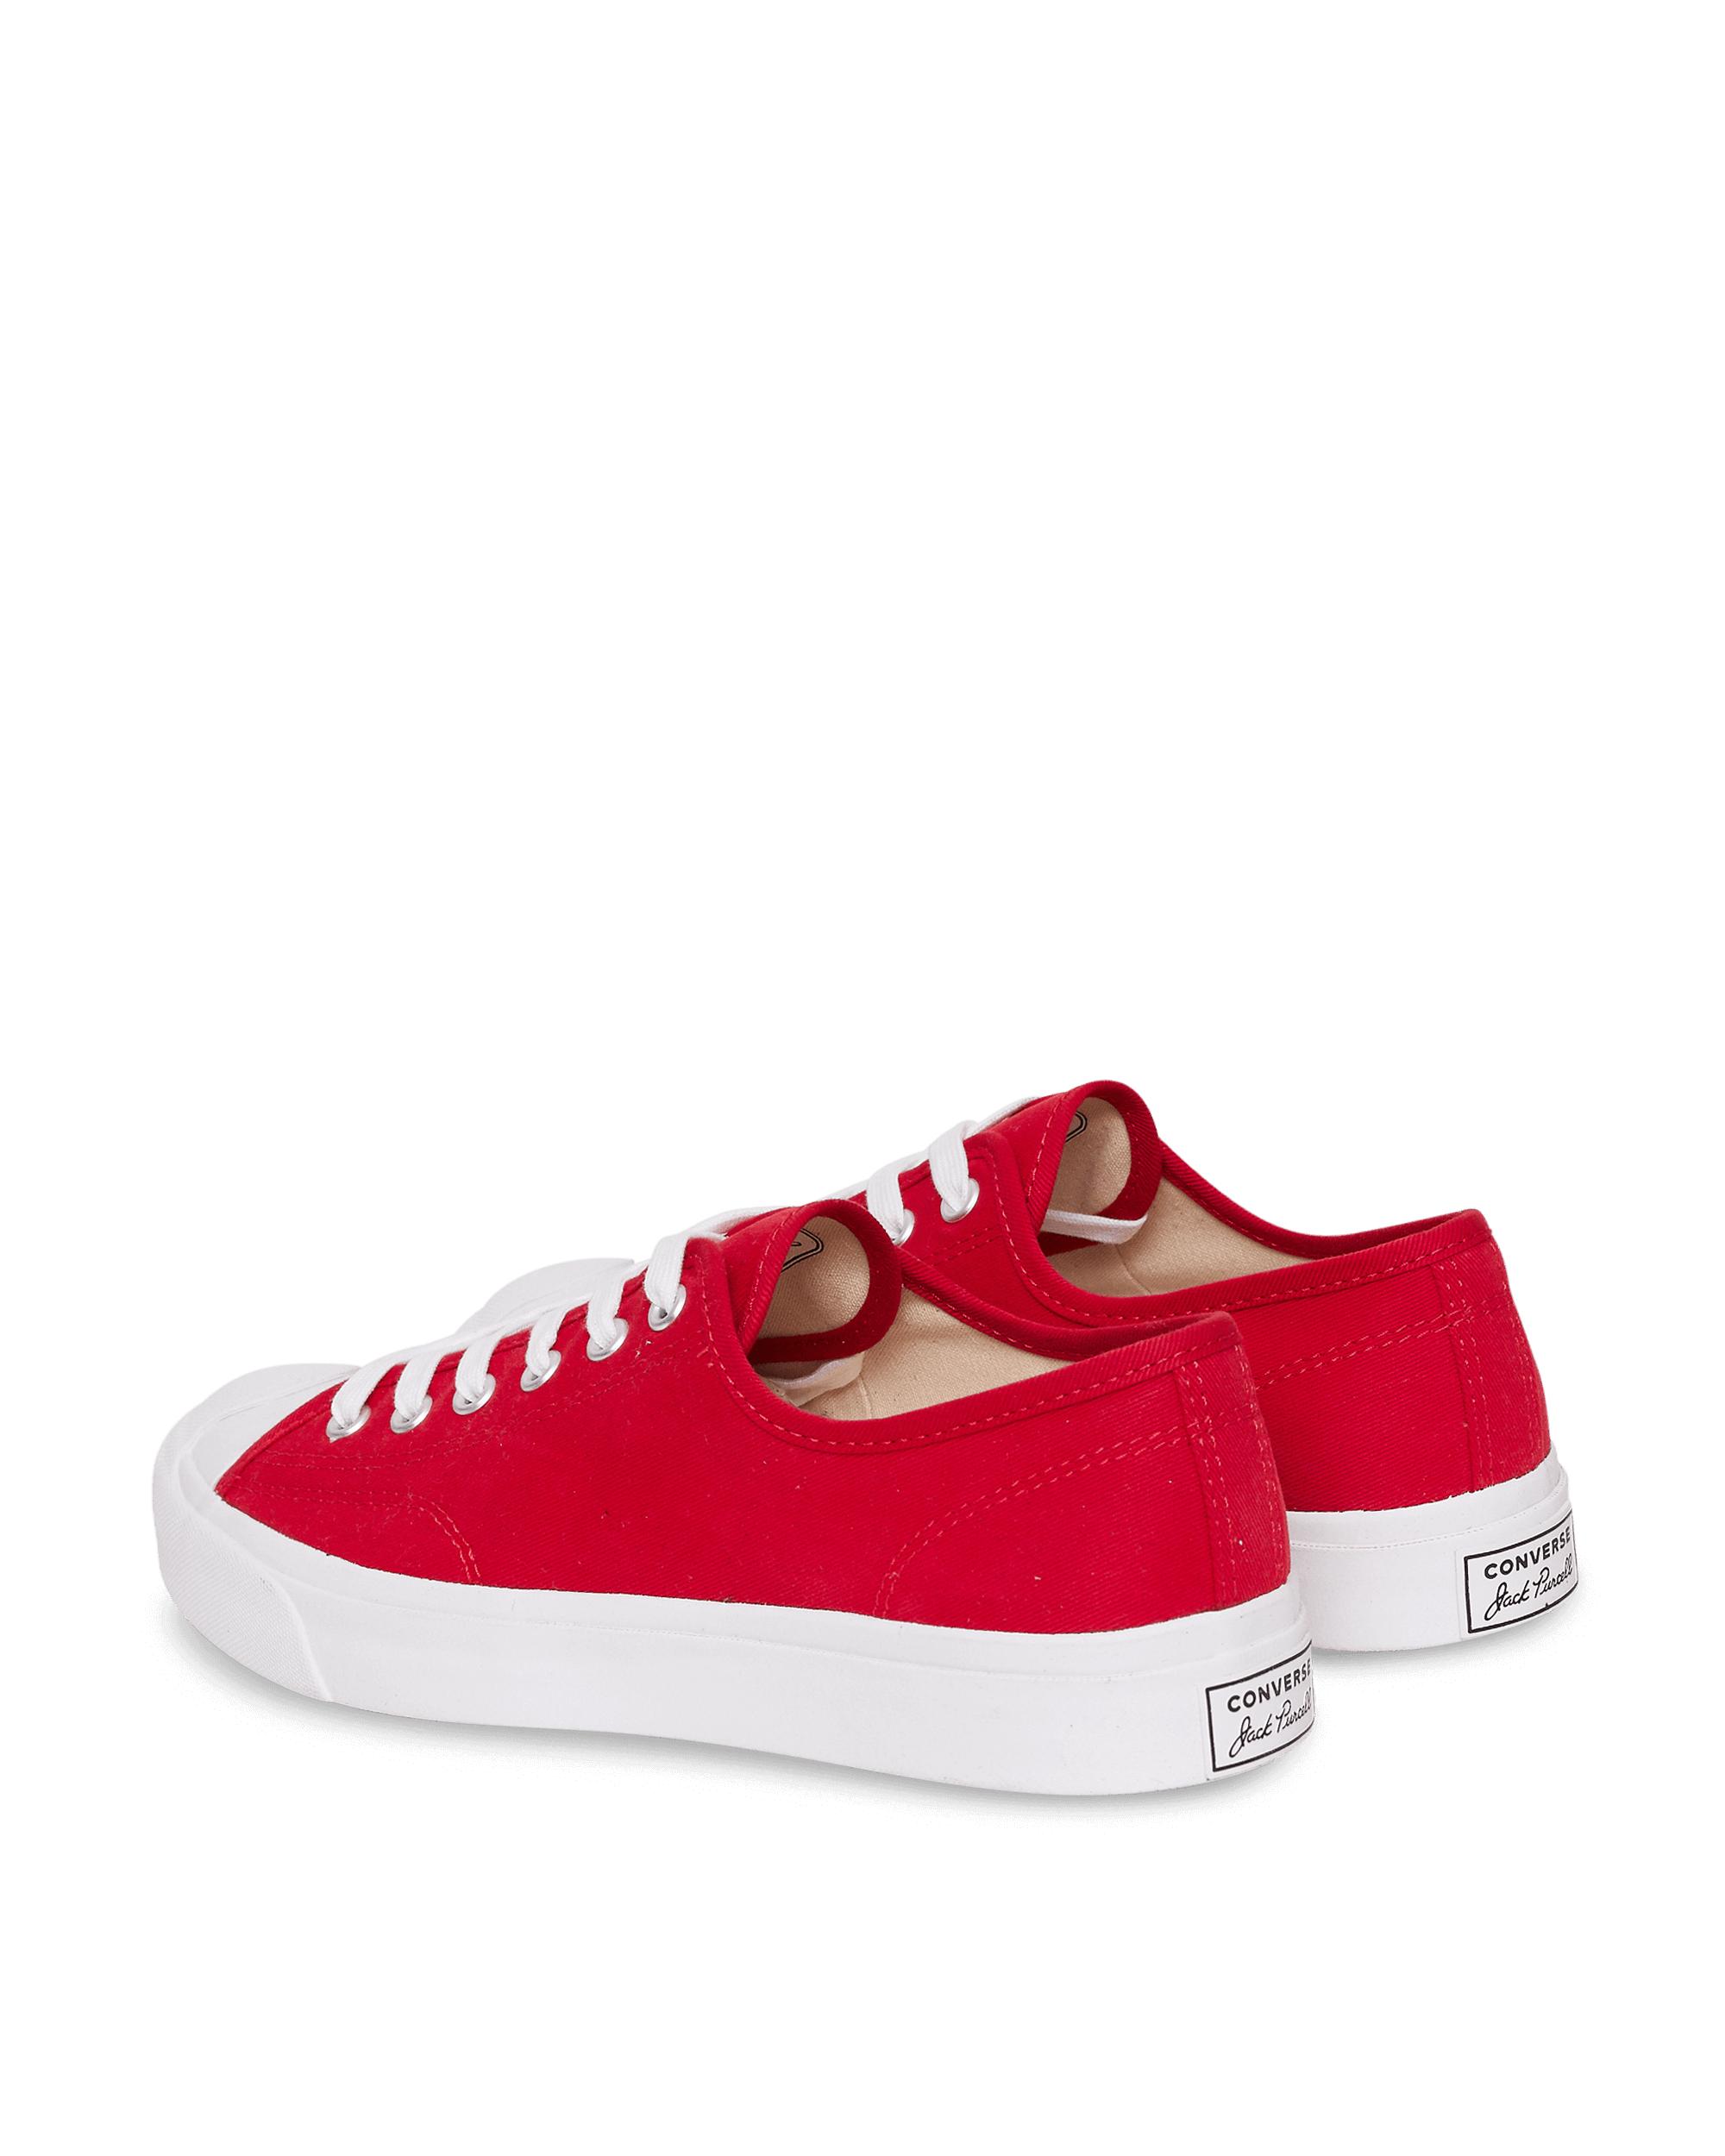 Converse Jack Purcell Sneakers in for Men Lyst